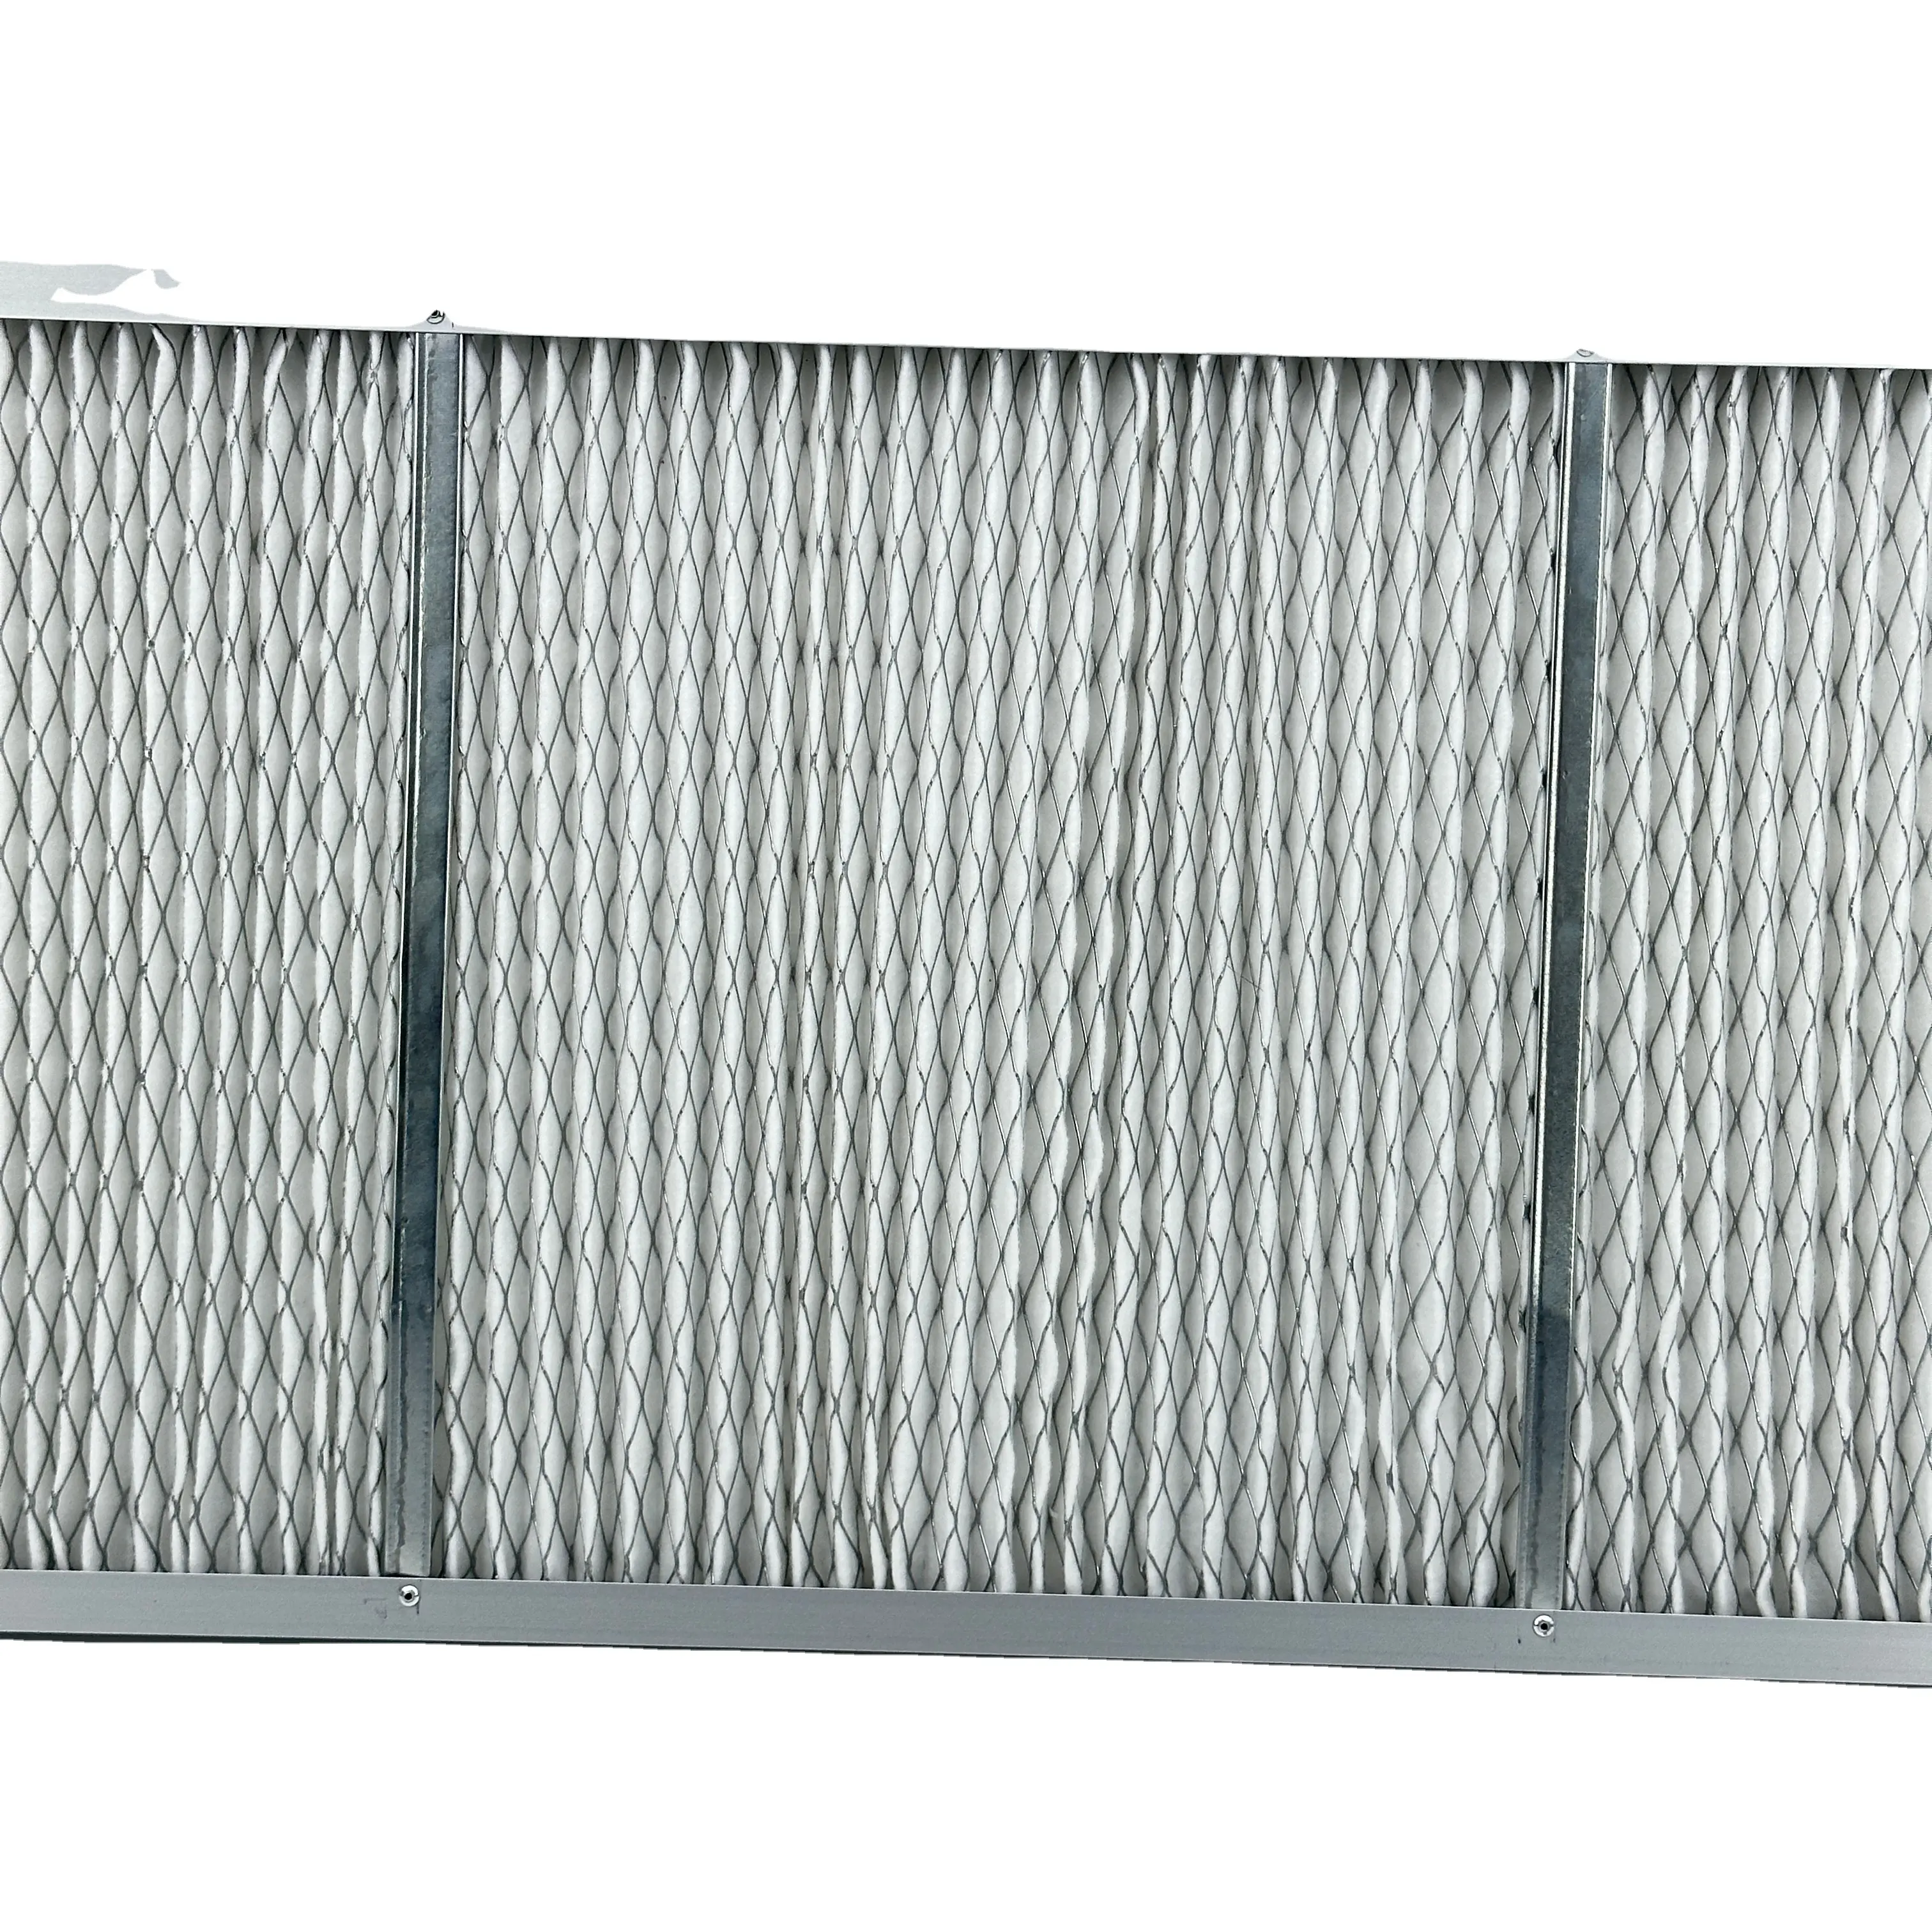 Air Conditioning System Filter Aluminum Wire Mesh Air Filter For Construction Machinery